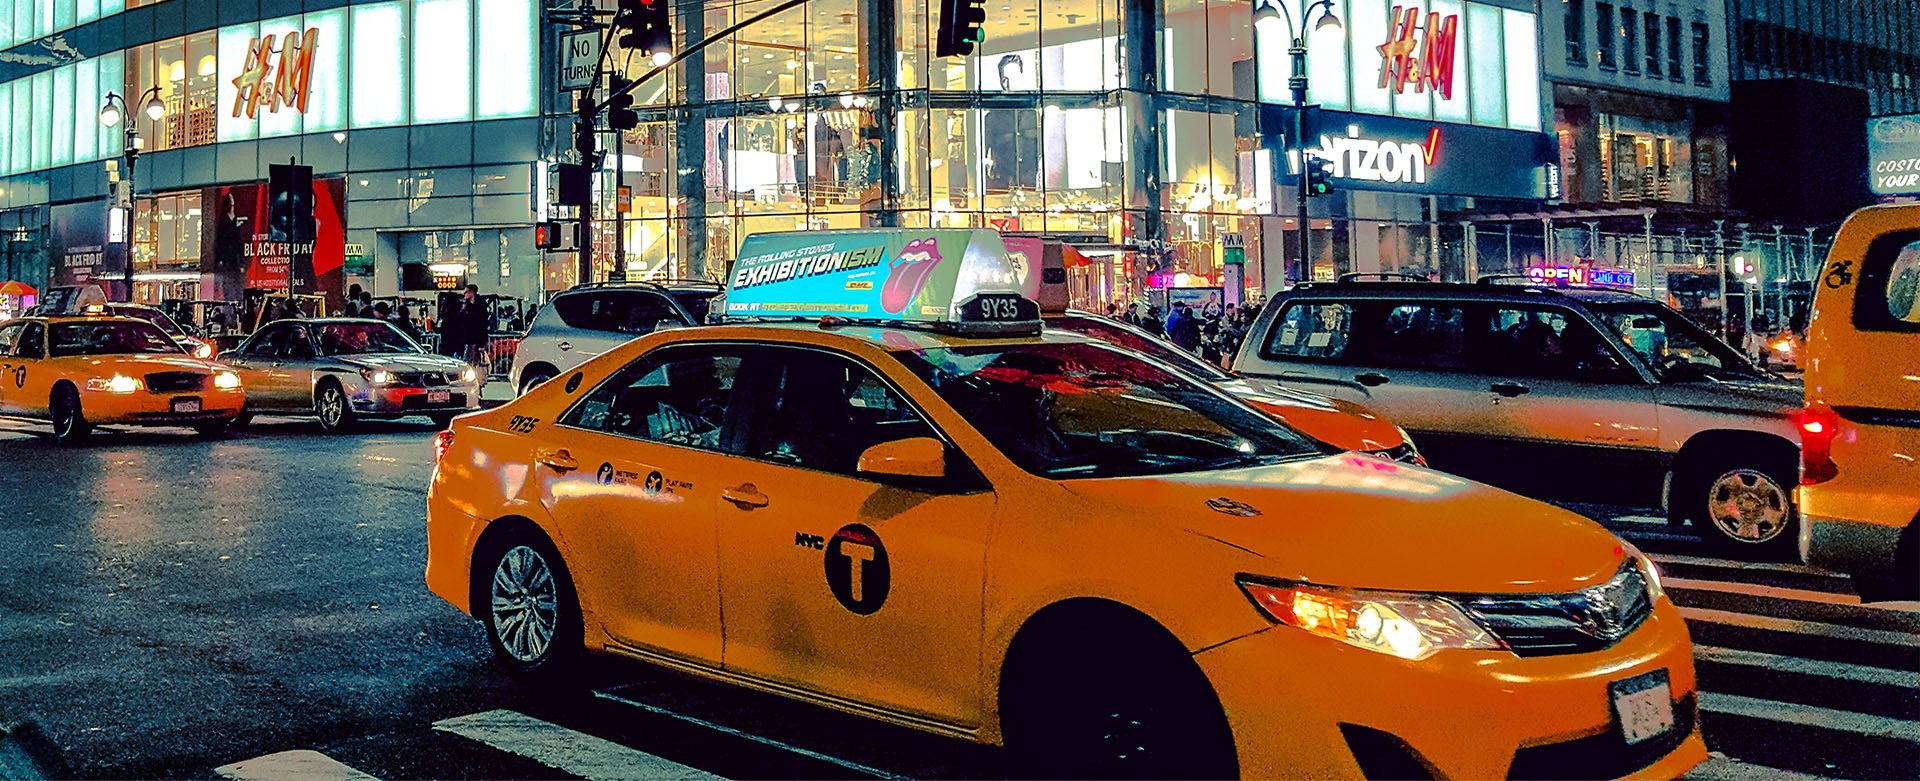 Why Business Travelers Prefer Uber TLC Rental Over Taxis